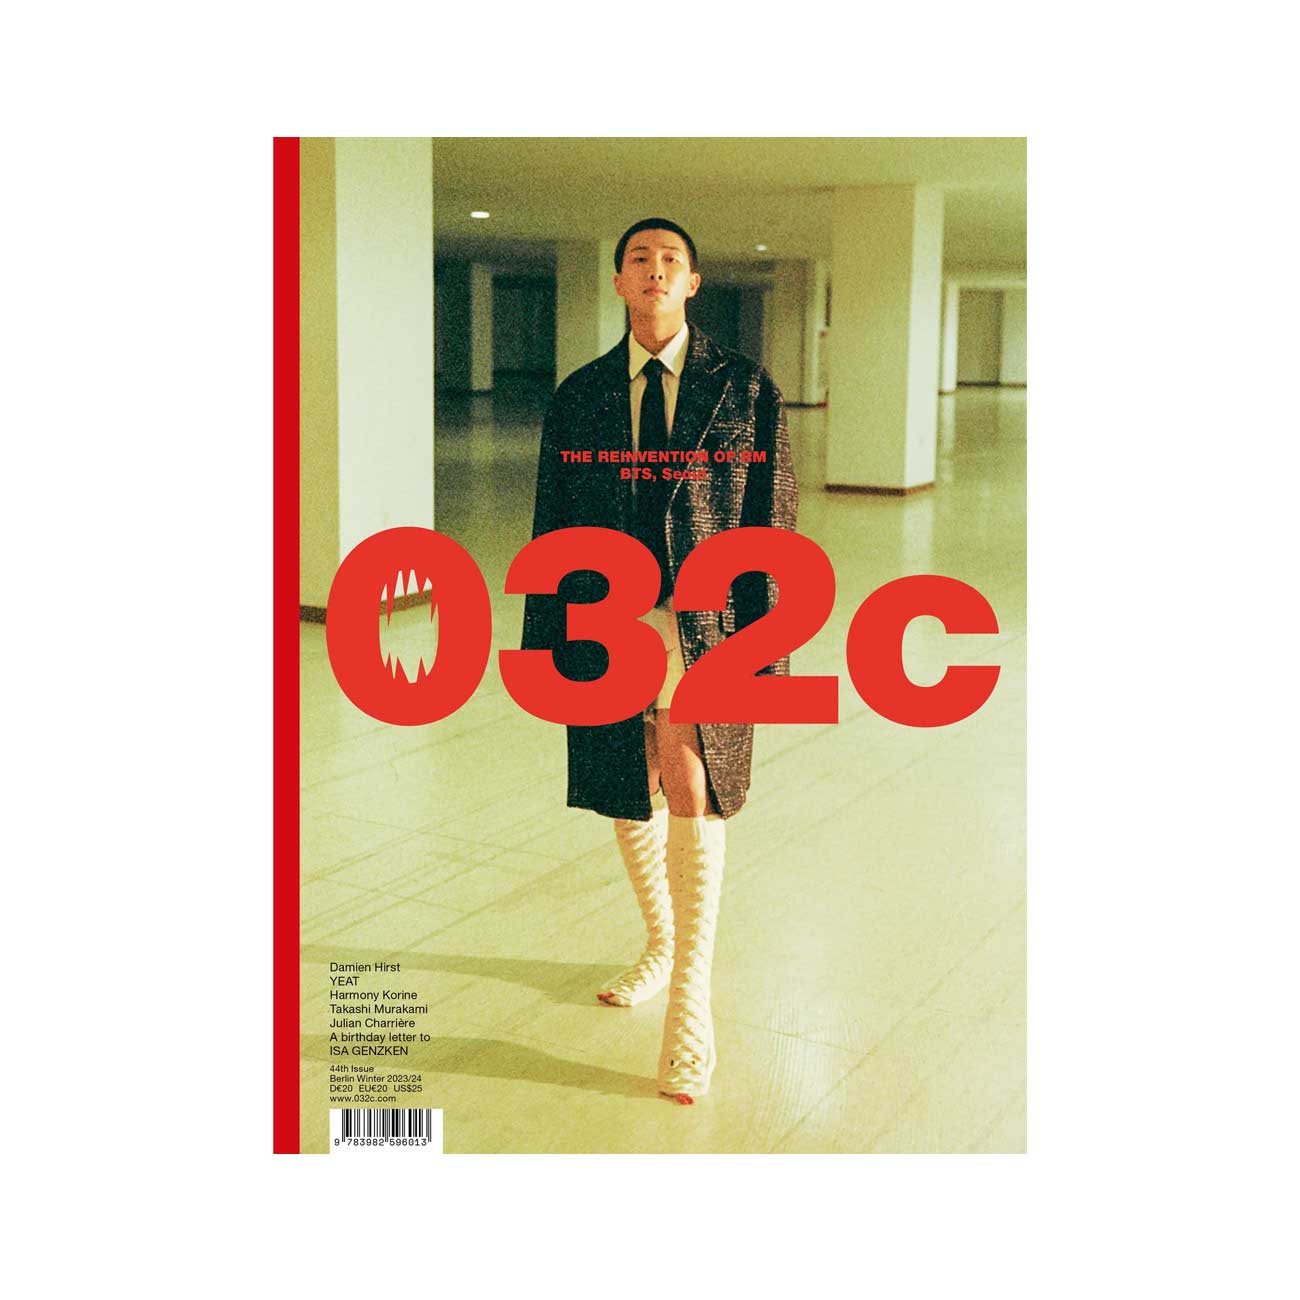 032c issue #44 winter 2023/2024: "the reinvention of rm bts, seoul"